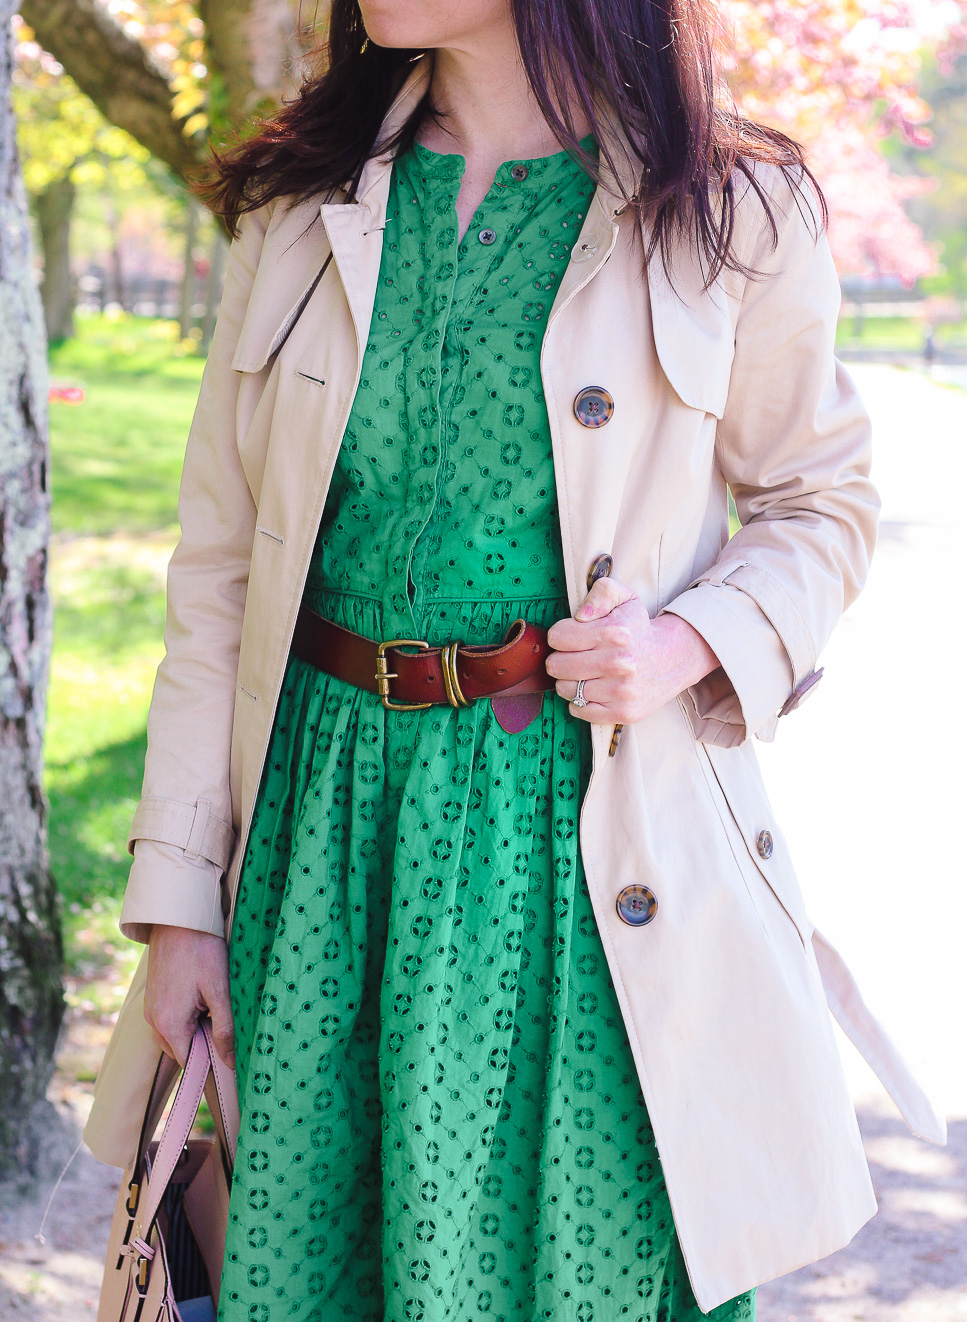 Spring Trench Coat Style from SEE GLASS BLOG